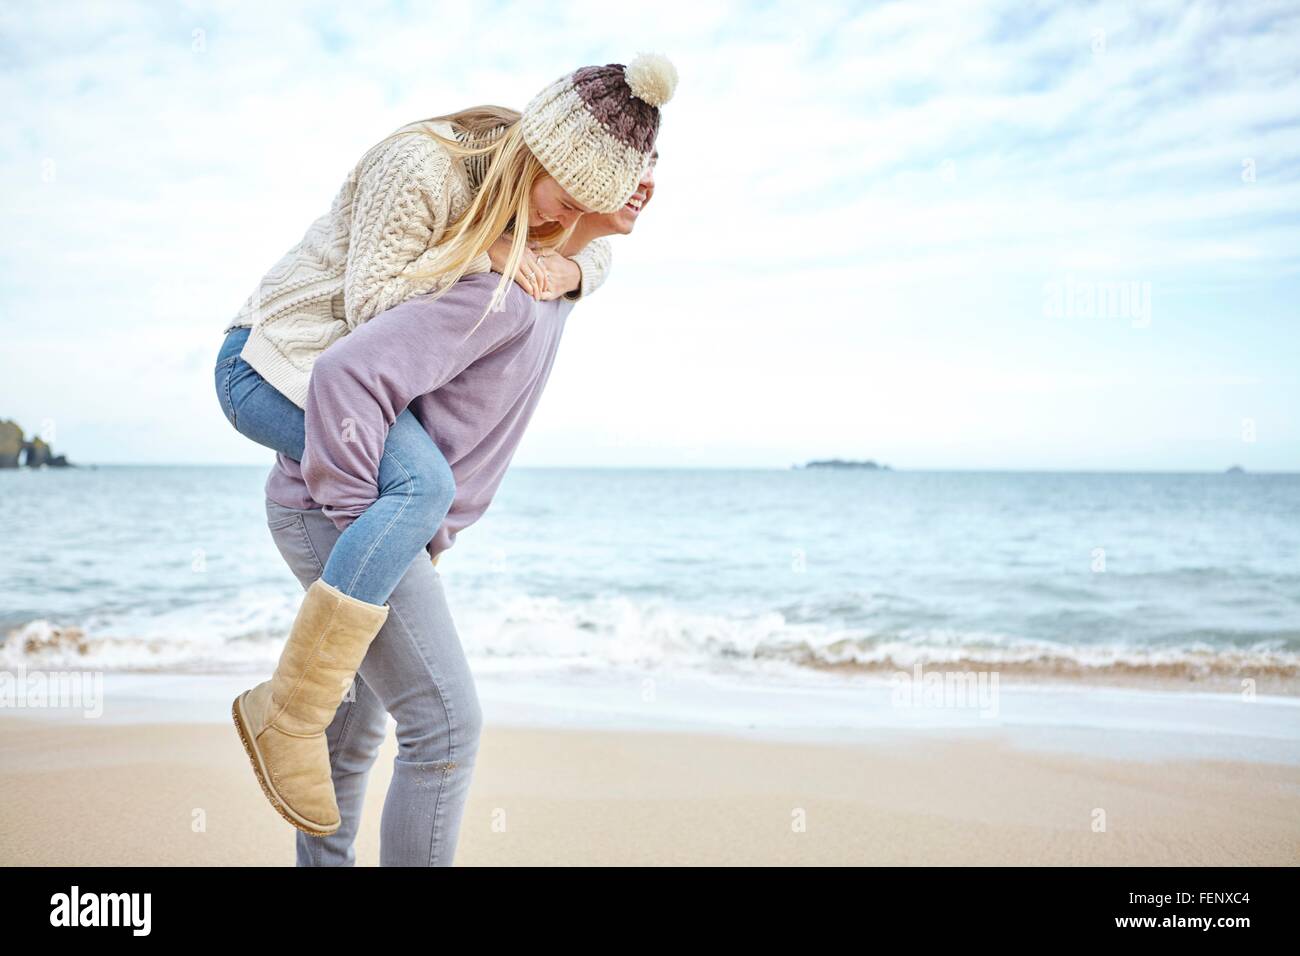 Young man giving girlfriend a piggyback on beach, Constantine Bay, Cornwall, UK Stock Photo